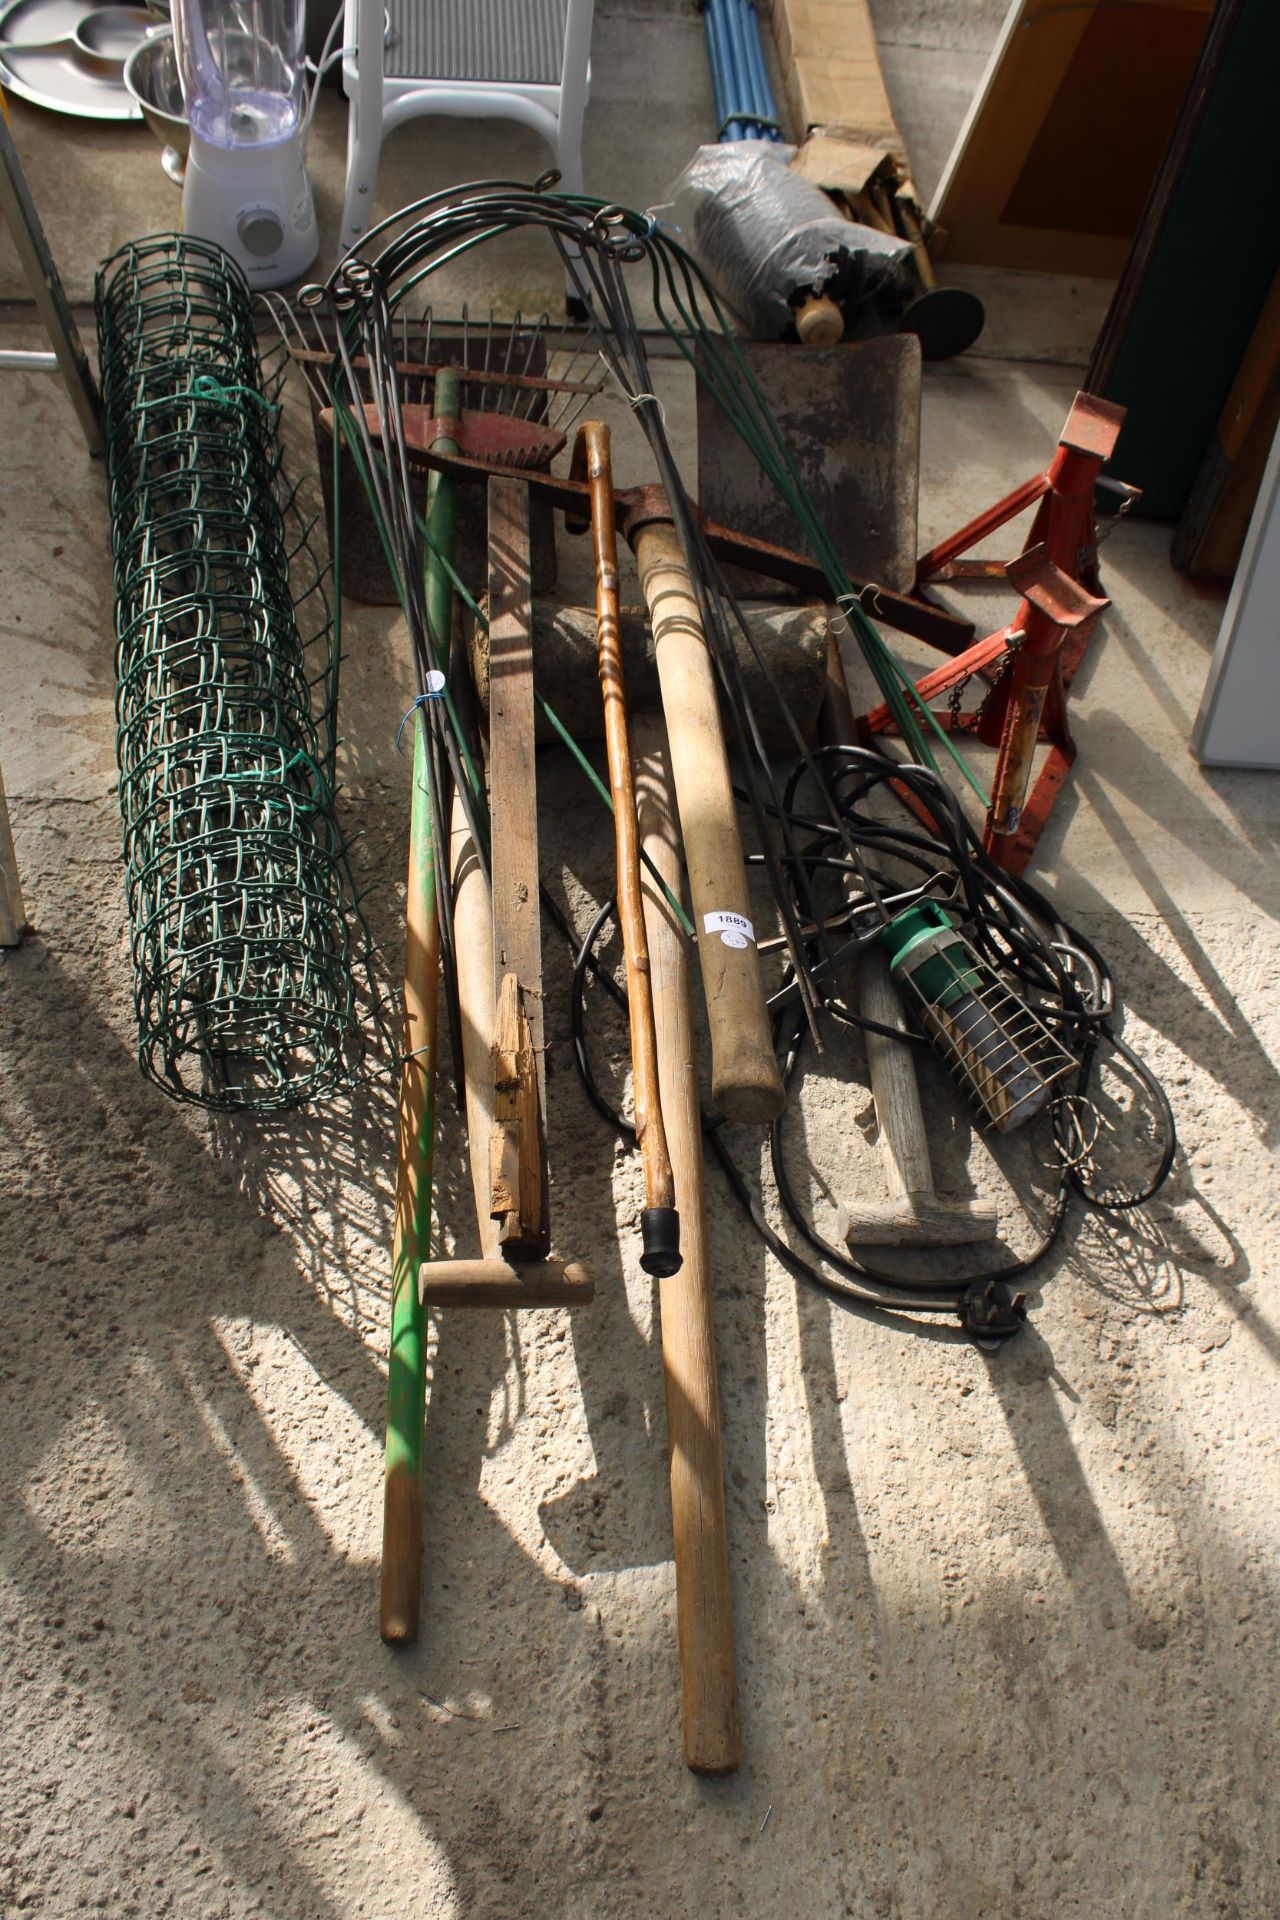 AN ASSORTMENT OF GARDEN TOOLS TO INCLUDE TWO SHOVELS, A LARGE RUBBER MALLET AND A PICK AXE ETC